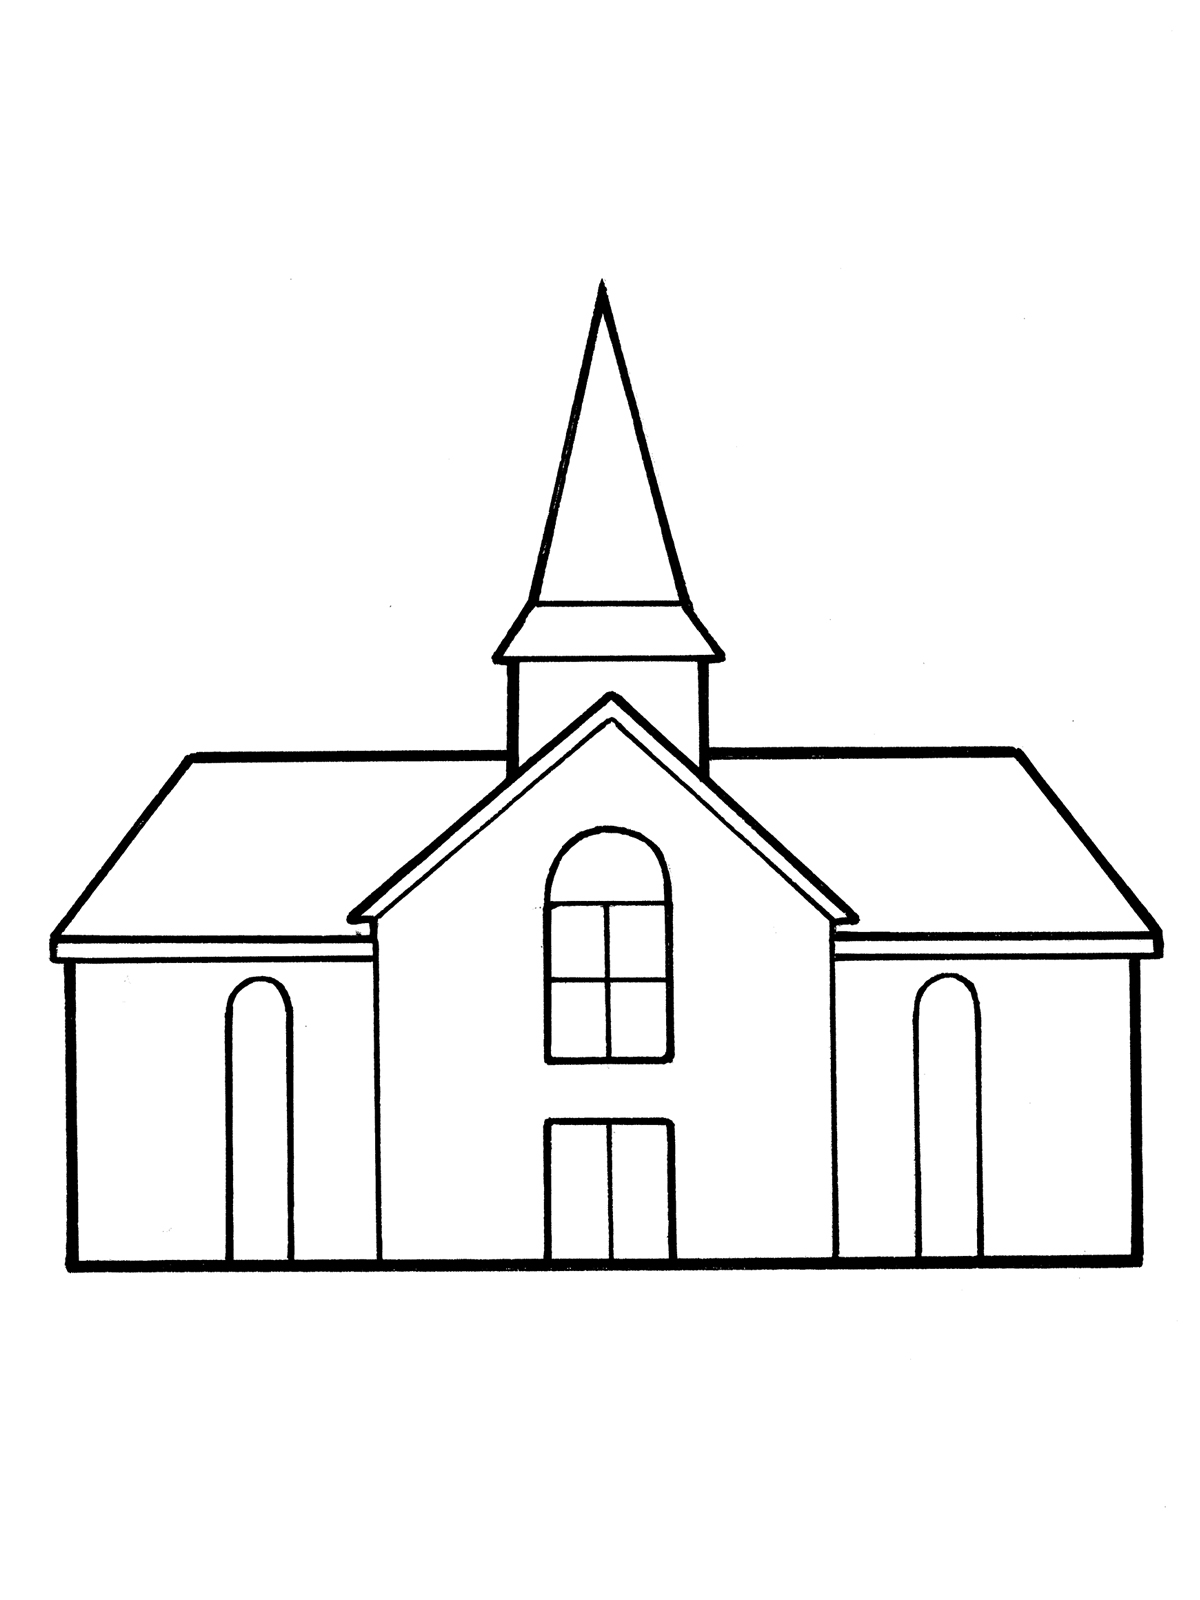 Coloring Page  Basic Meetinghouse Or Kids Reading In Front Of A Church